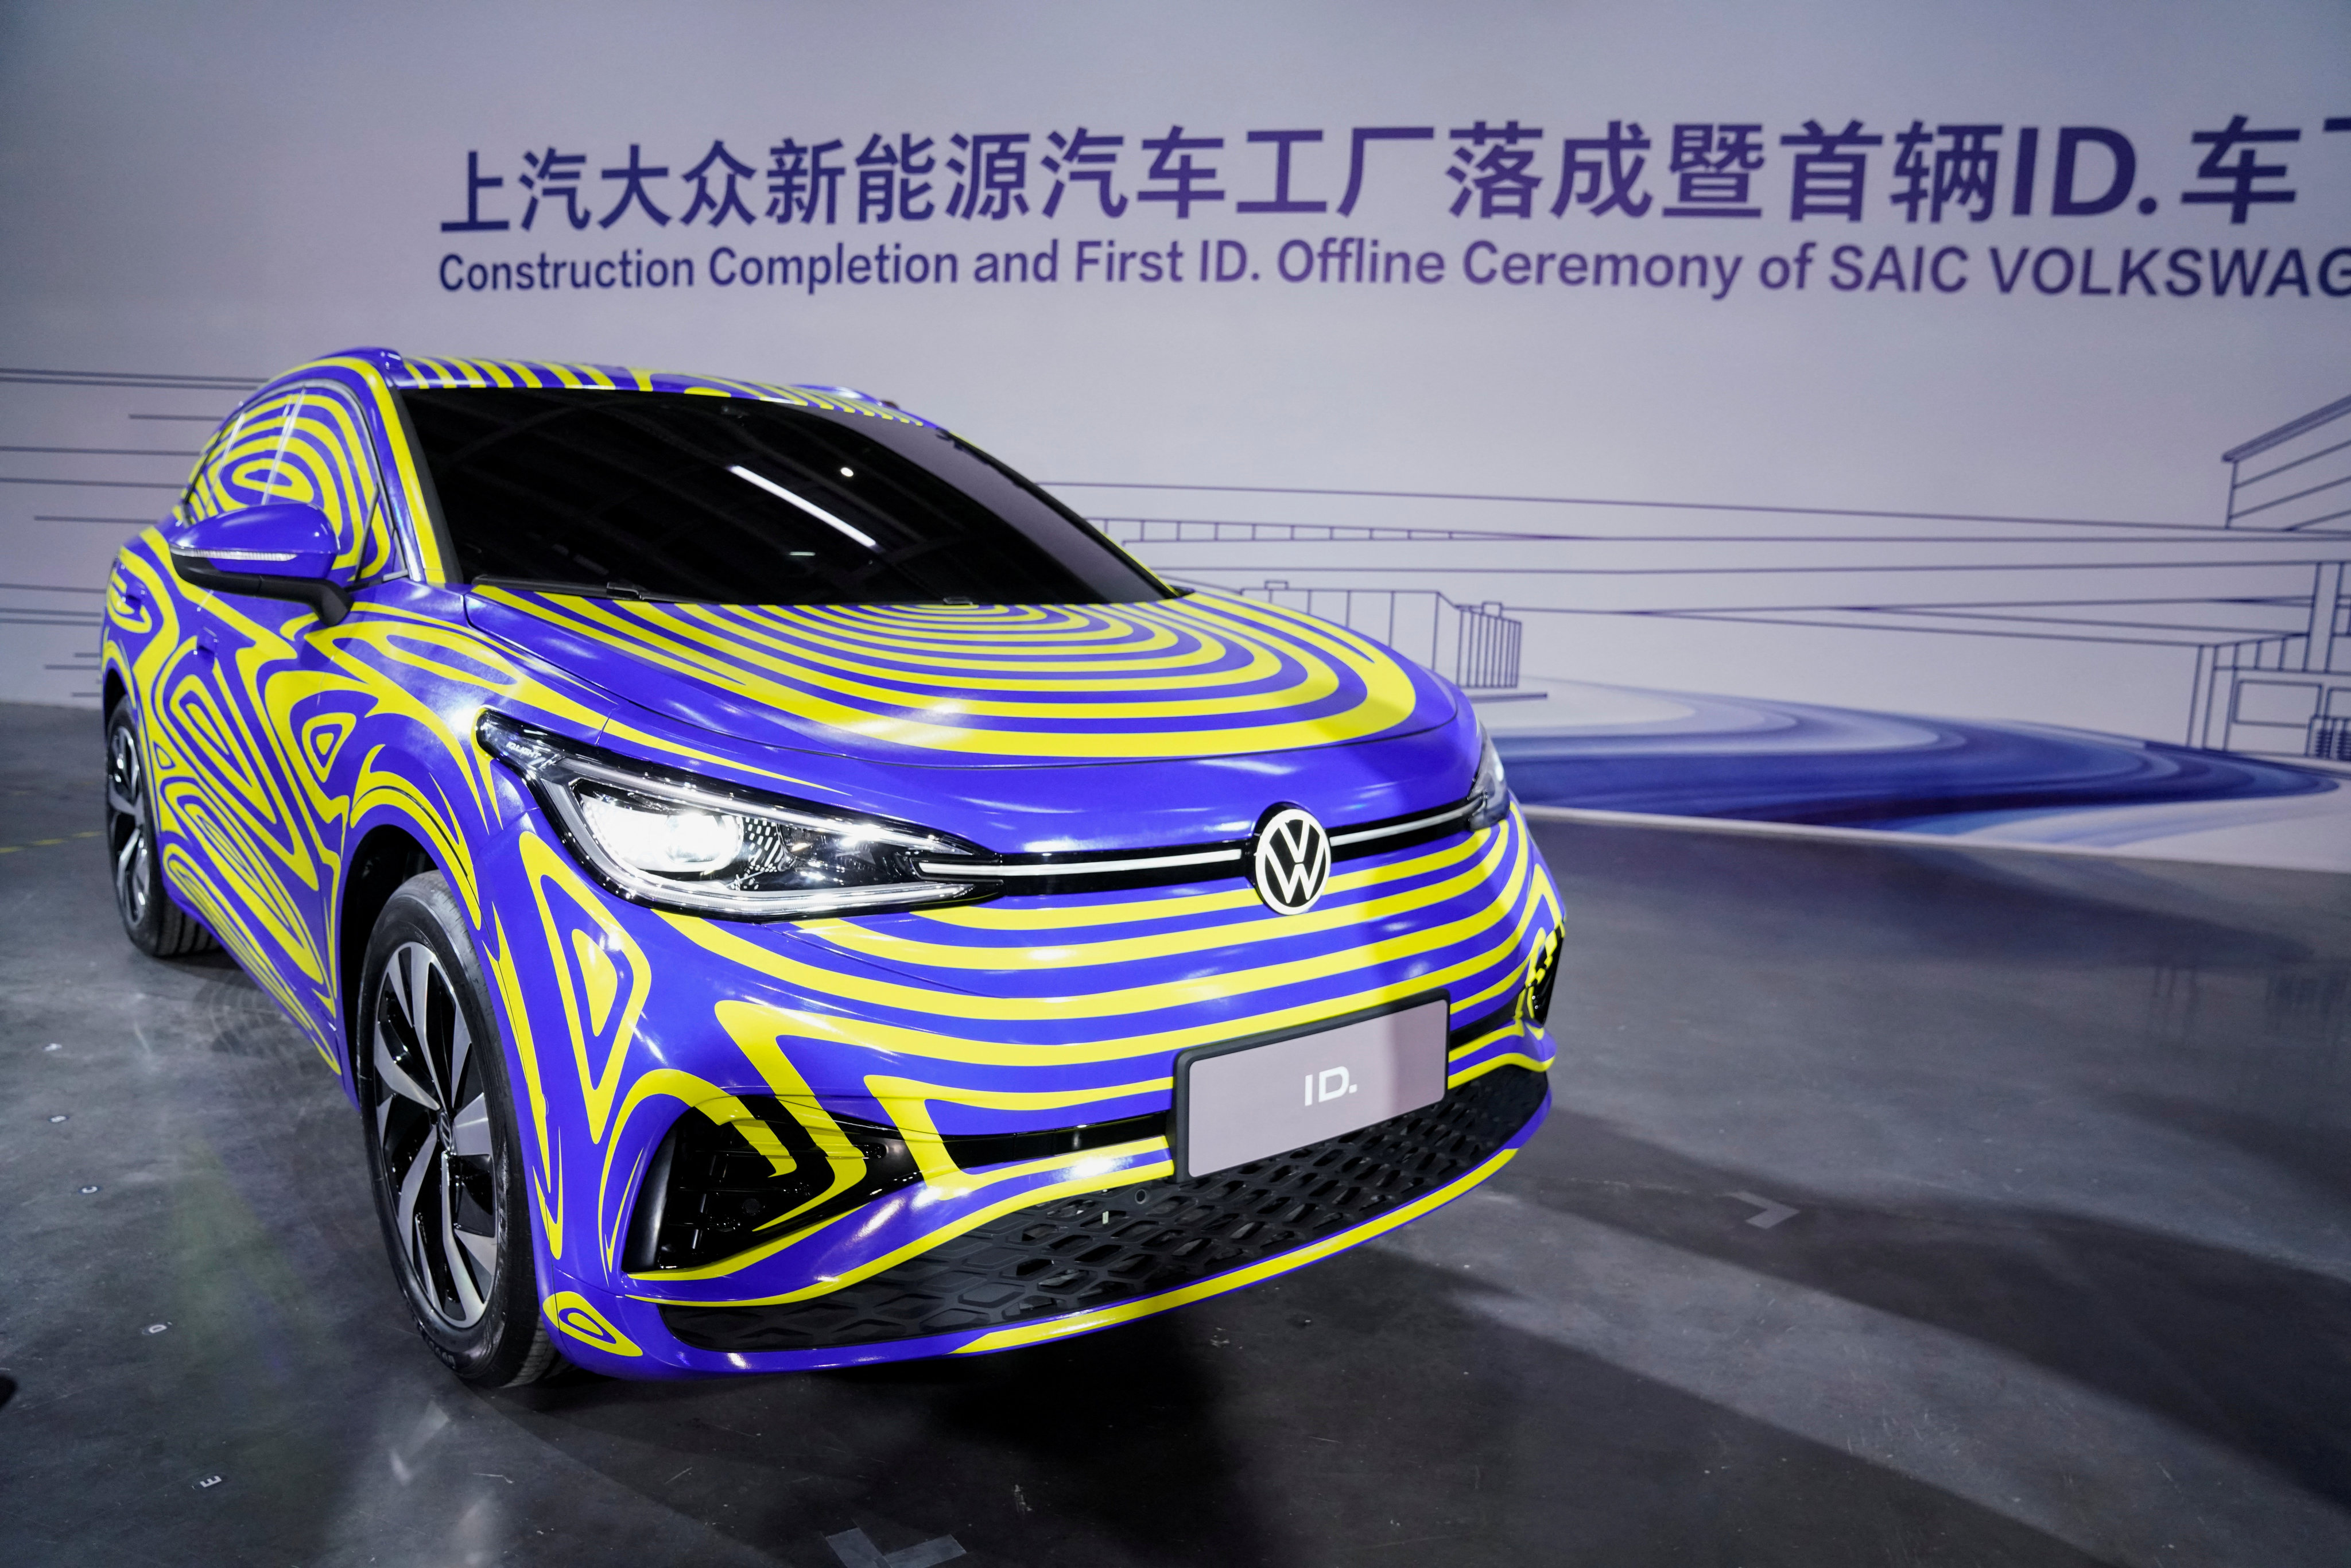 A Volkswagen electric ID car is seen during a construction completion event of SAIC Volkswagen MEB electric vehicle plant in Shanghai, China, in this file photo from November 2019. Photo: Reuters